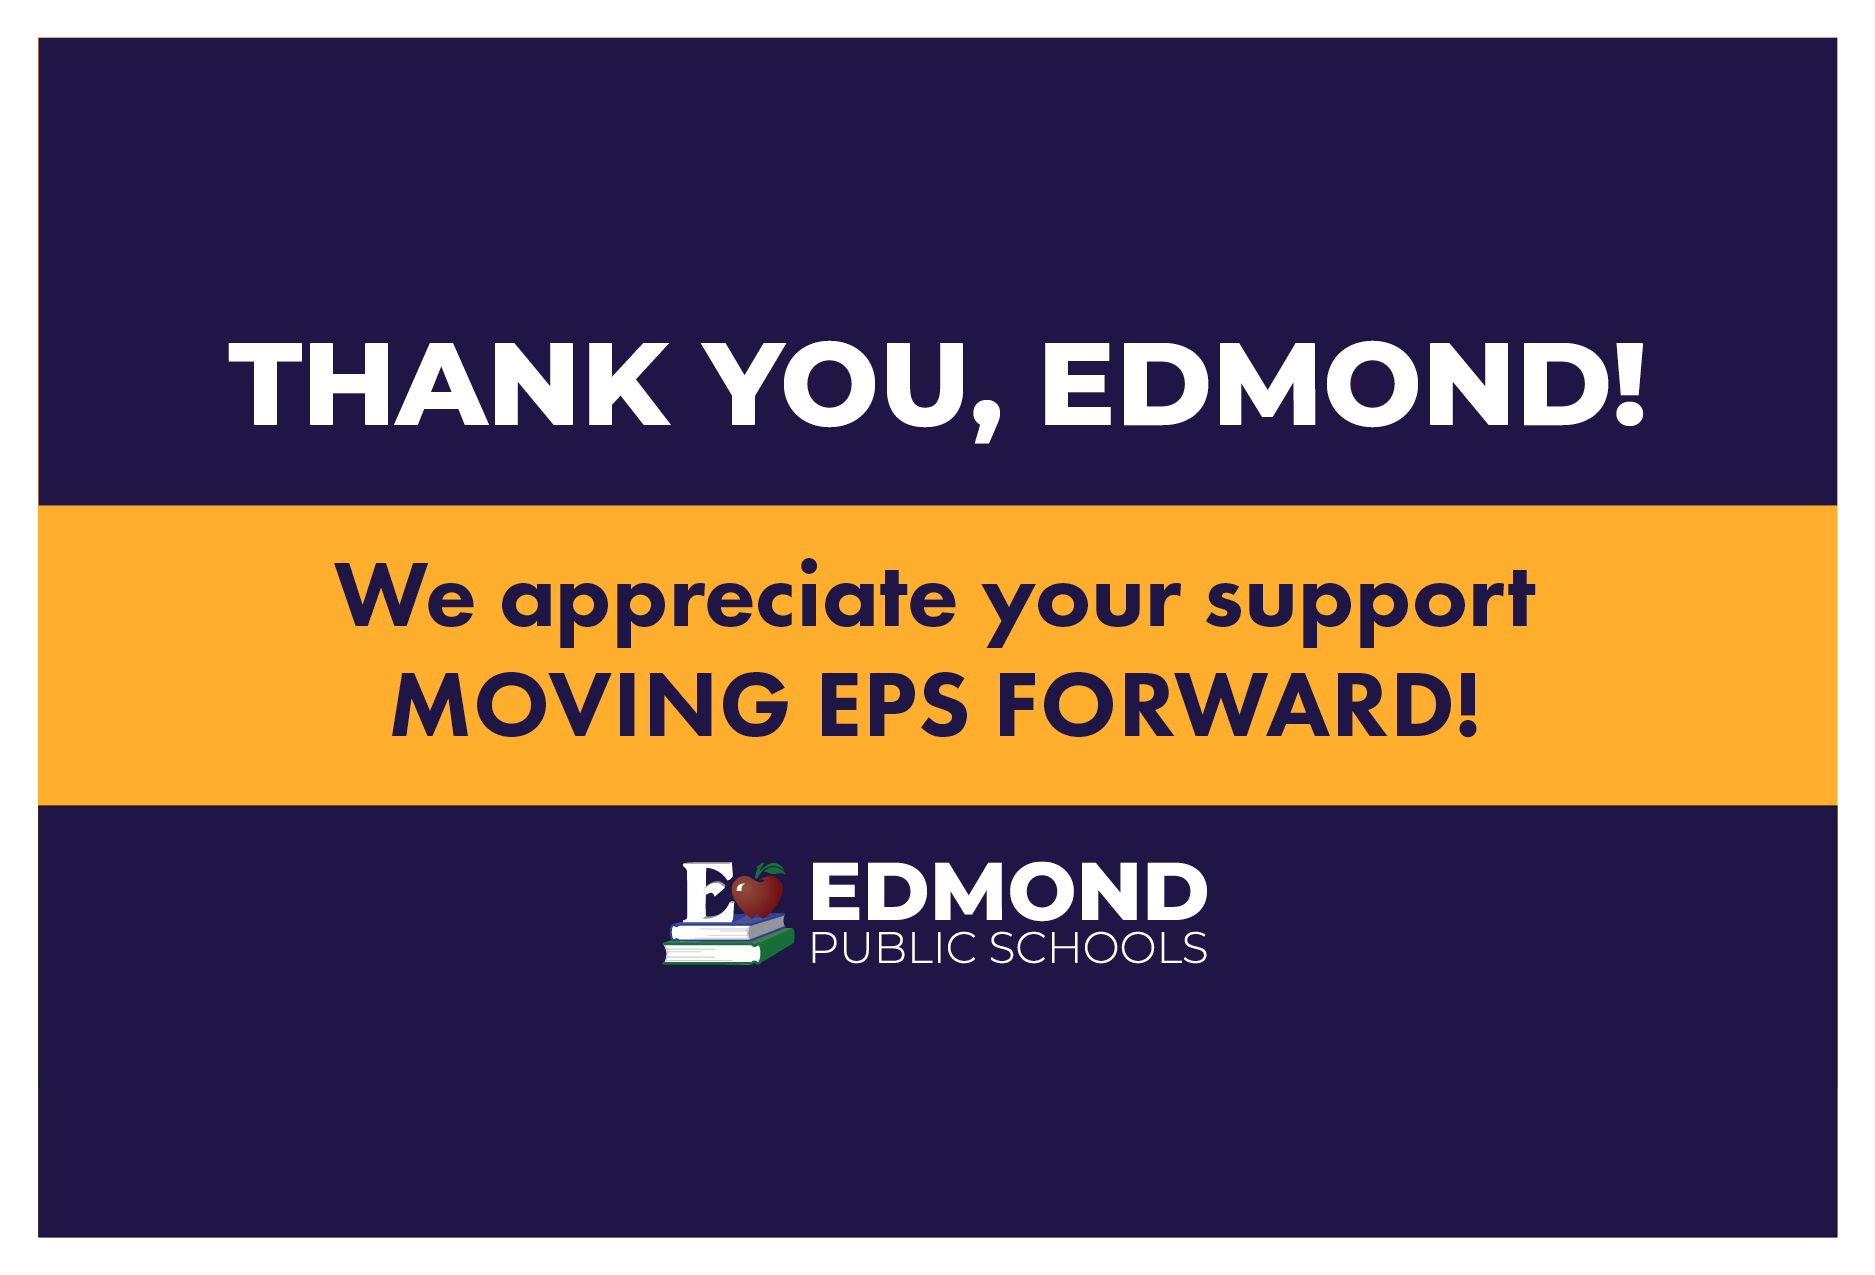 Thank you, Edmond! We appreciate your support moving EPS forward!